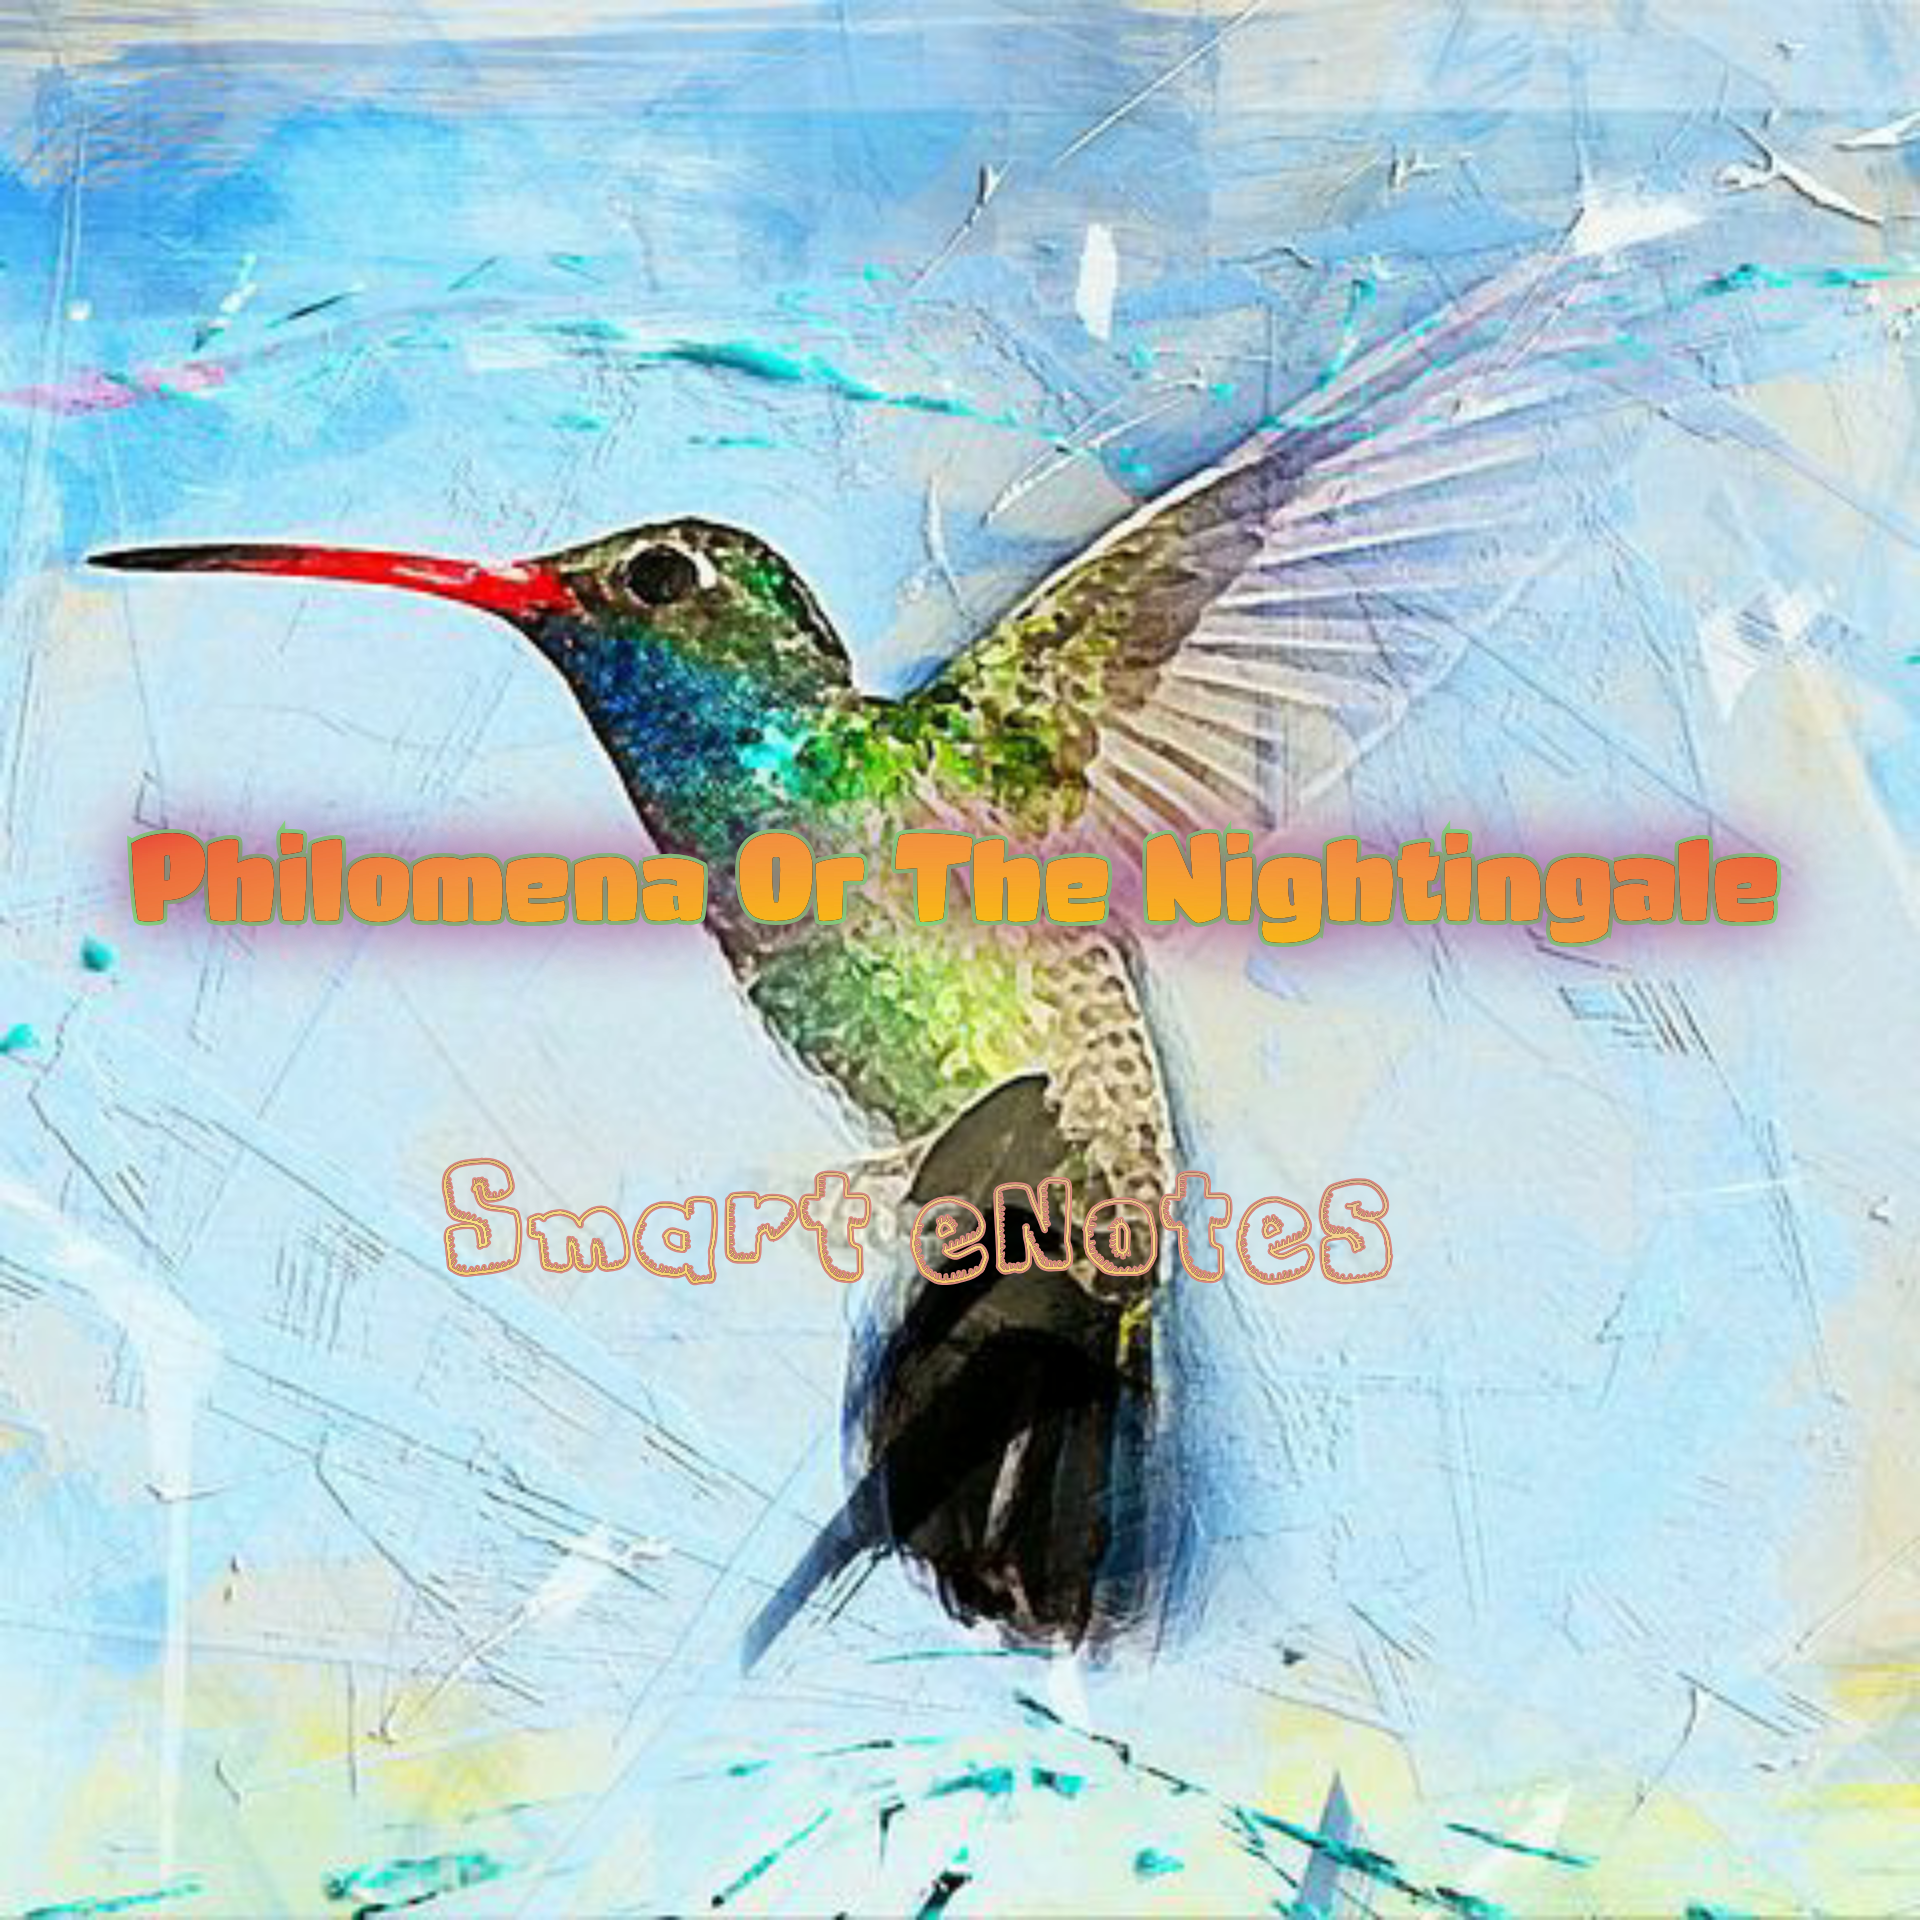 The Nightingale or Philomela by Sir Philip Sidney: Summary, Analysis and Questions 1